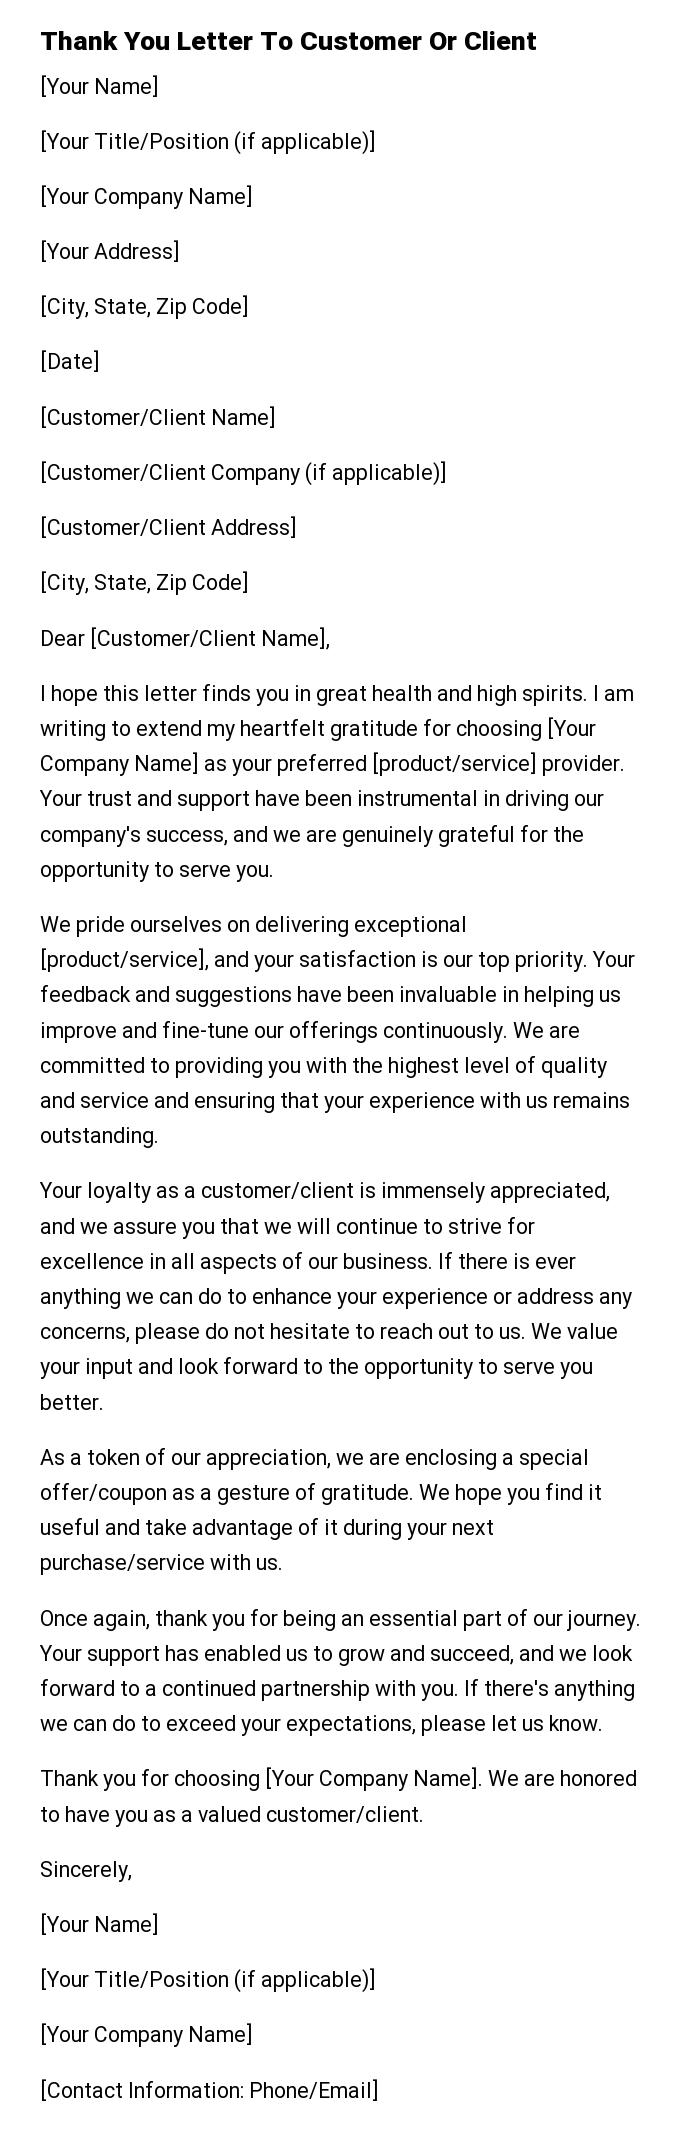 Thank You Letter To Customer Or Client